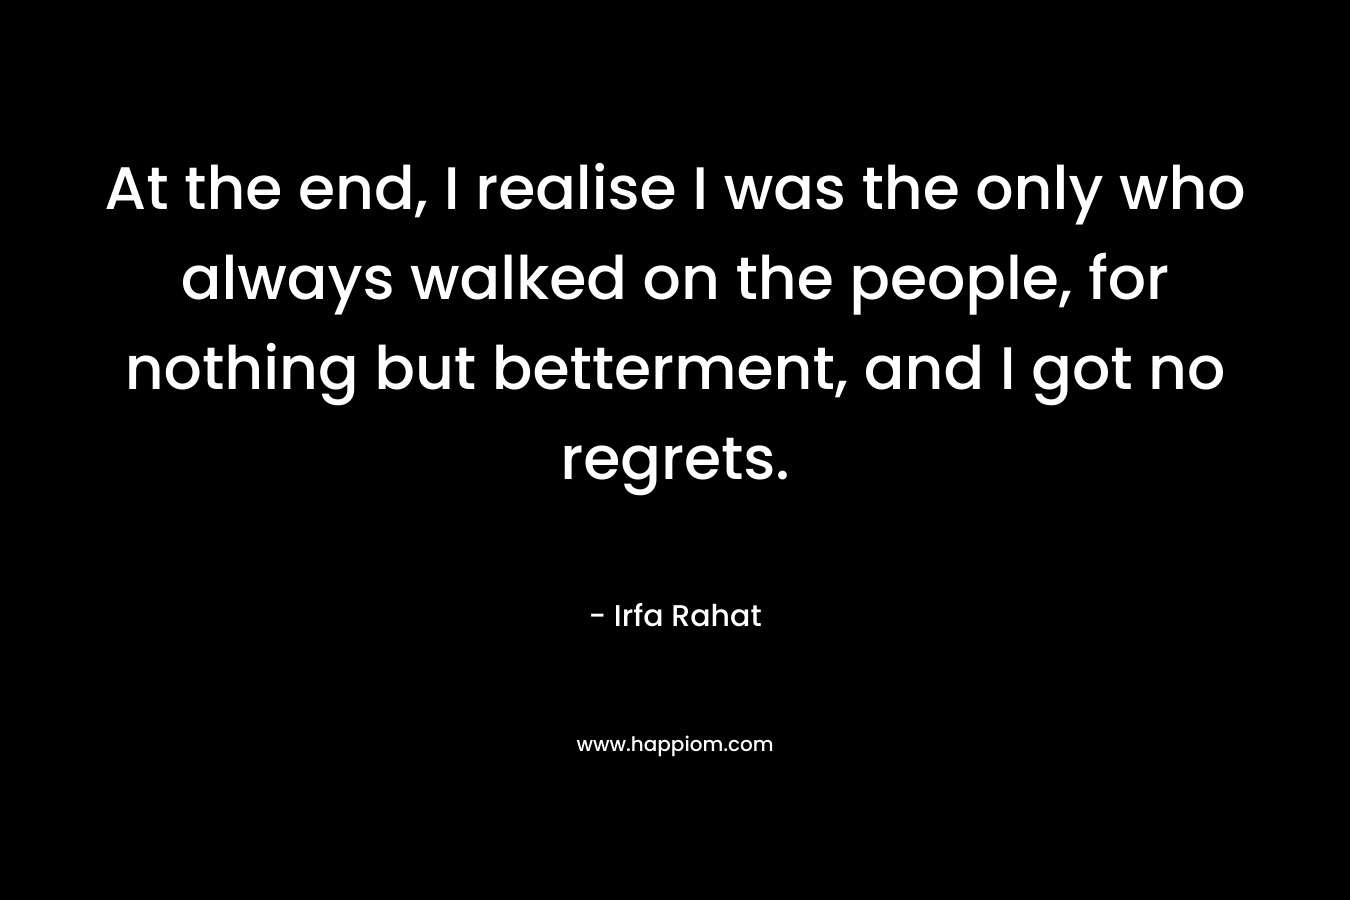 At the end, I realise I was the only who always walked on the people, for nothing but betterment, and I got no regrets. – Irfa Rahat